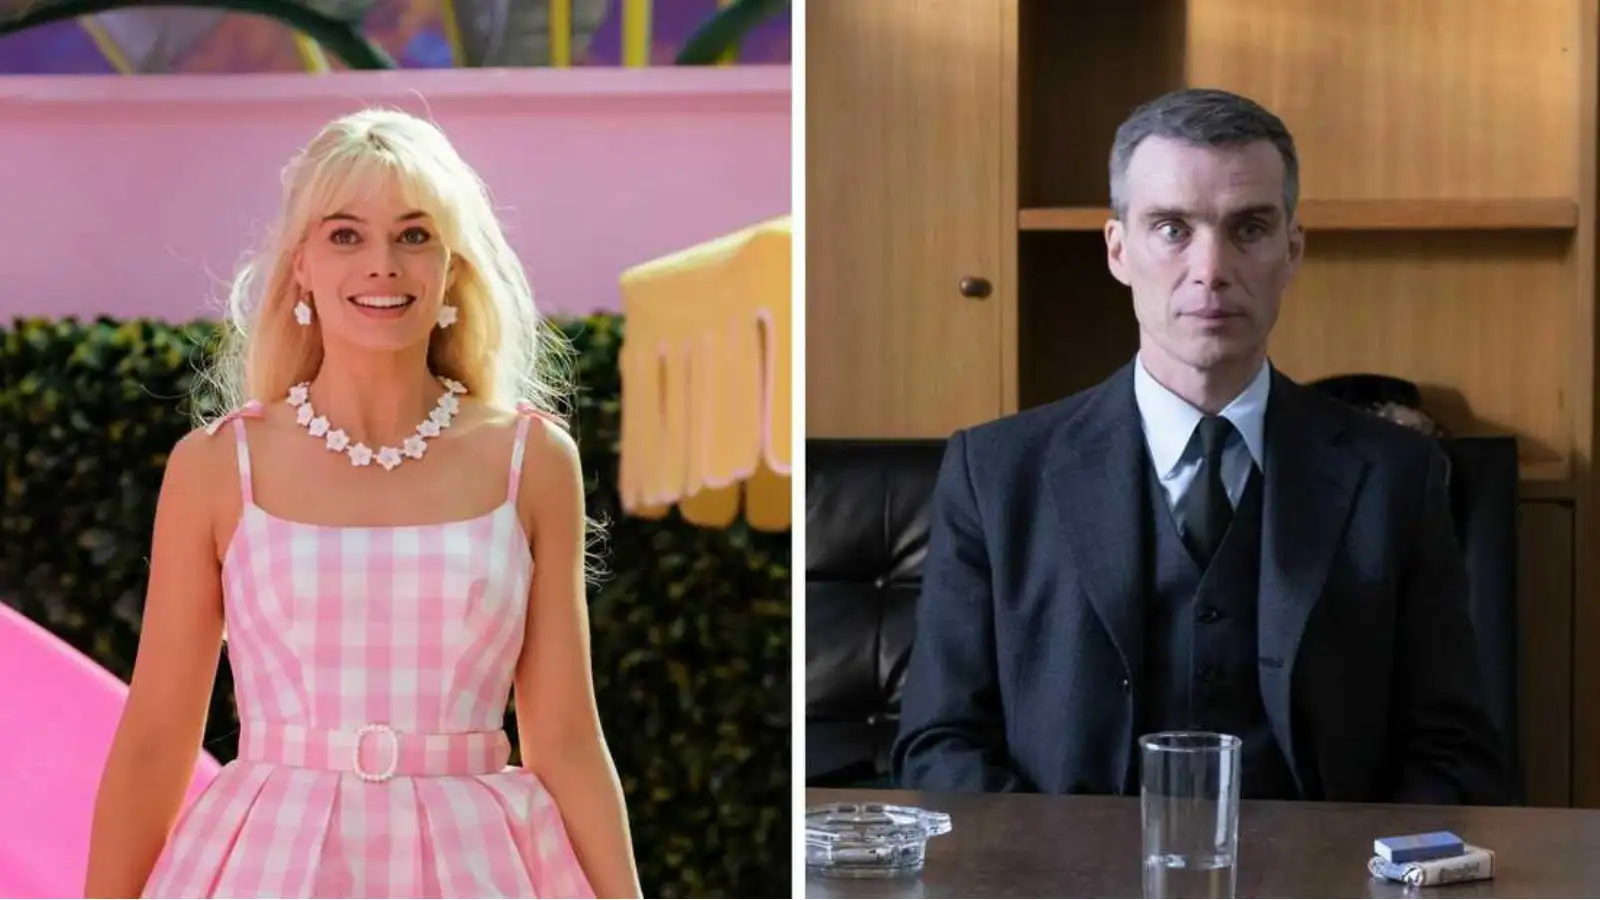 How To Watch ‘Barbie’ And ‘Oppenheimer’ Movie Online?